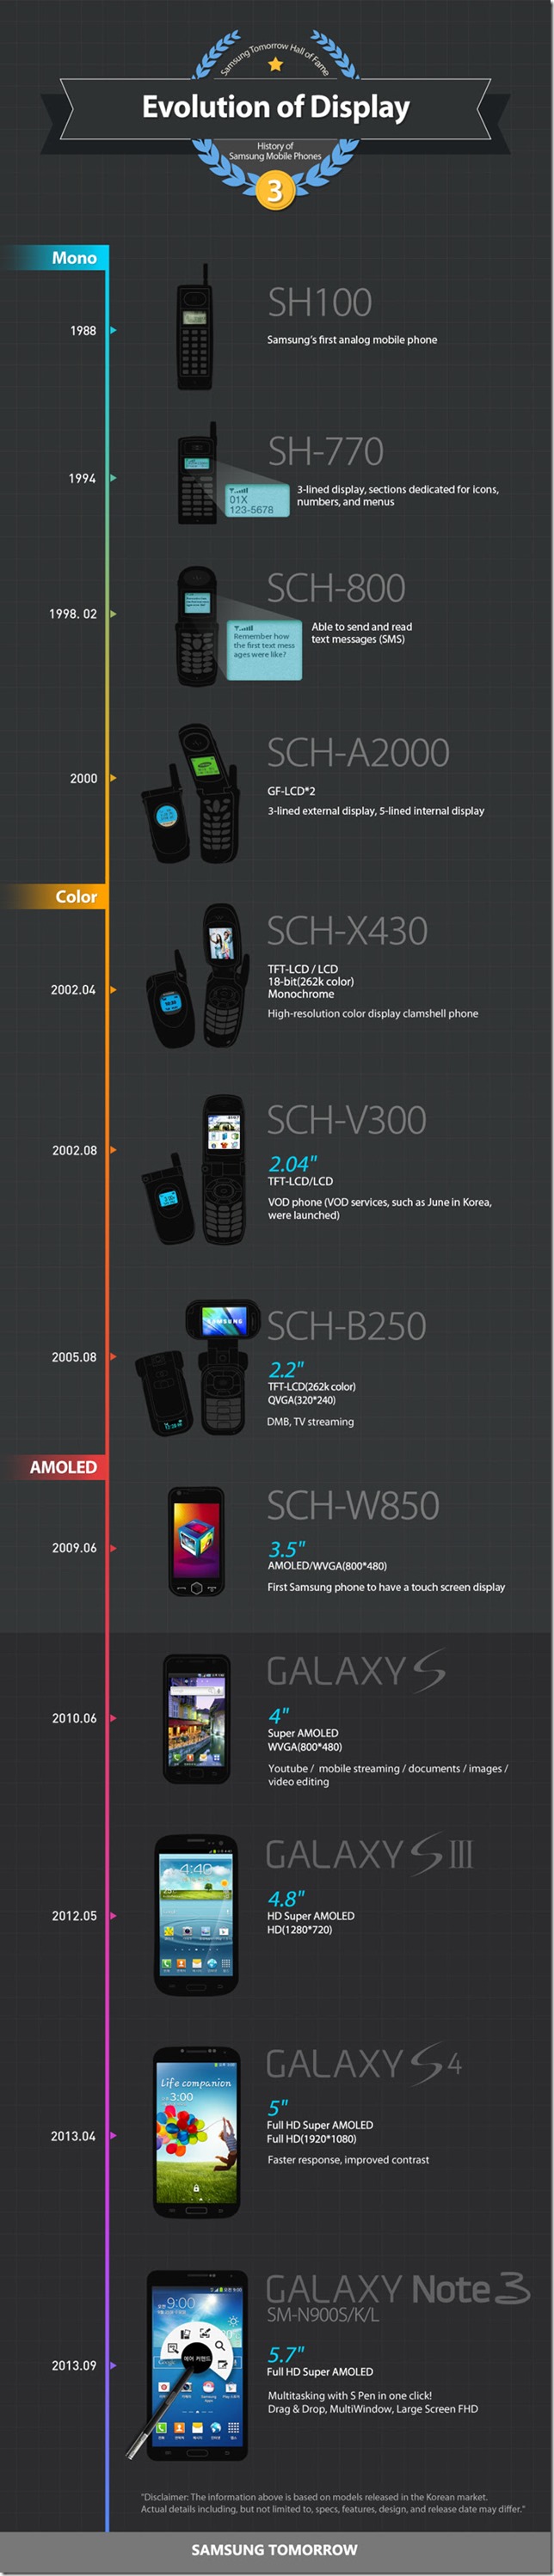 Samsung Display Infogrphic Samsung Releases an Infographic on the Evolution of Displays in Smartphones